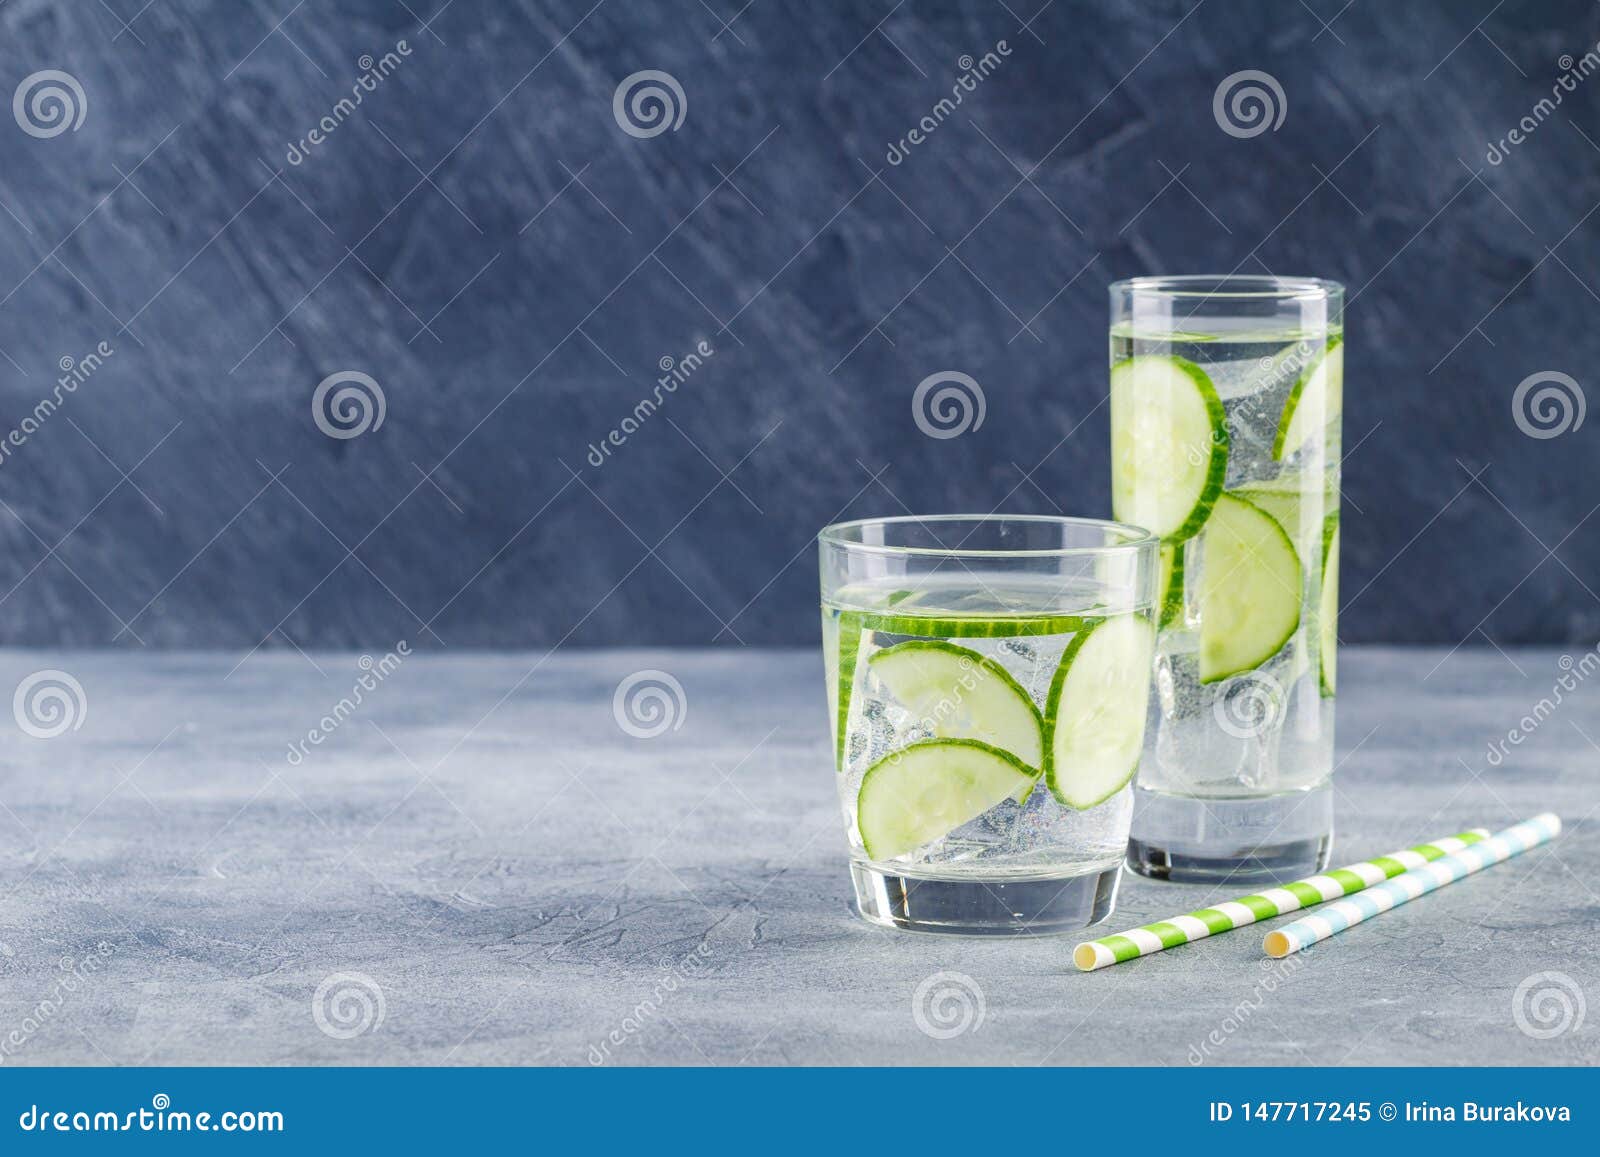 Infused Water With Cucumber And Ice Stock Image - Image of background